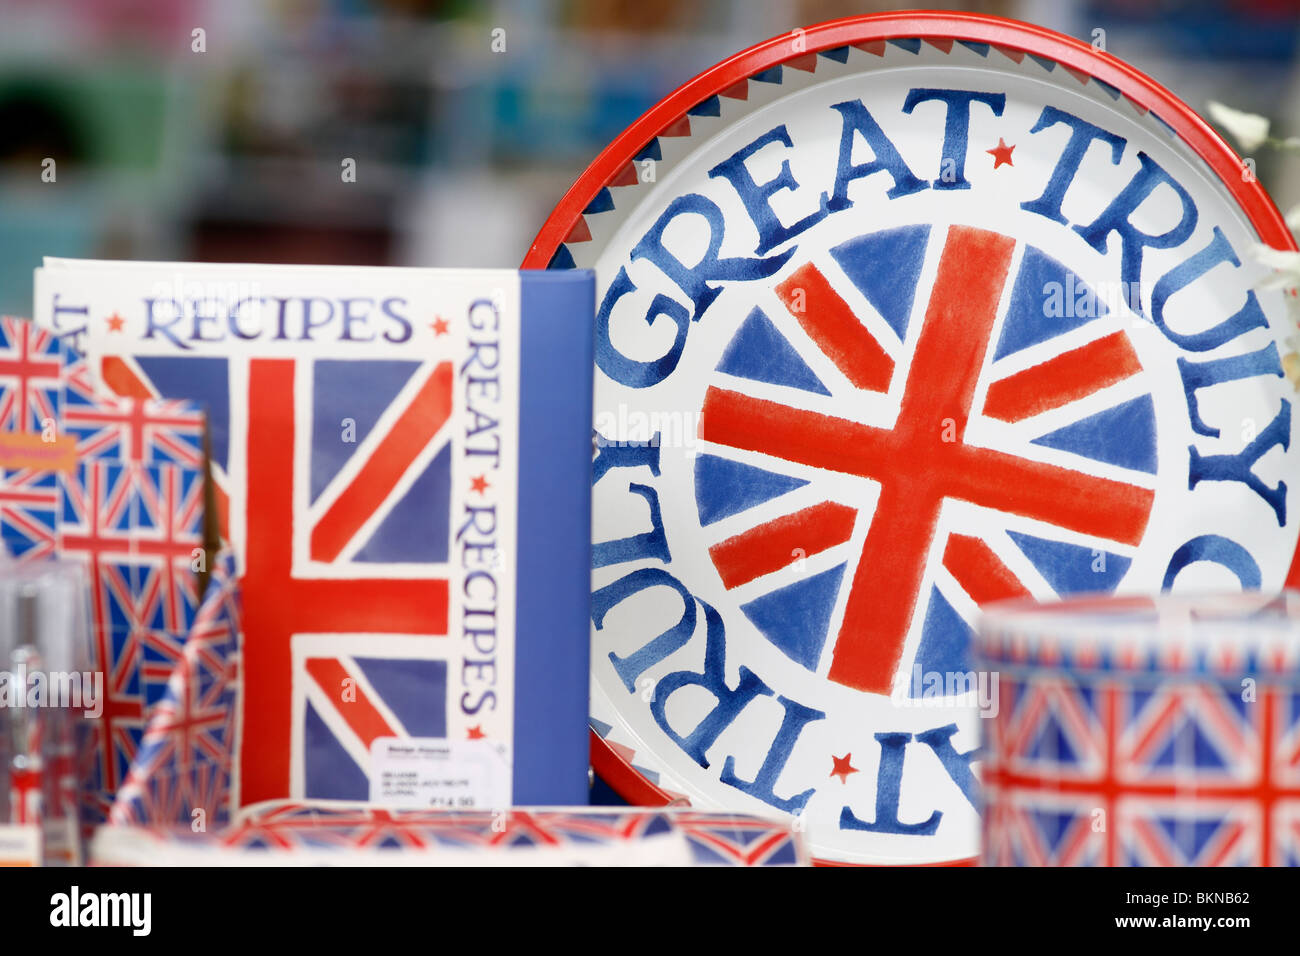 Truly great, recipes, Union Flag emblems Brookfields Garden Centre Stock Photo